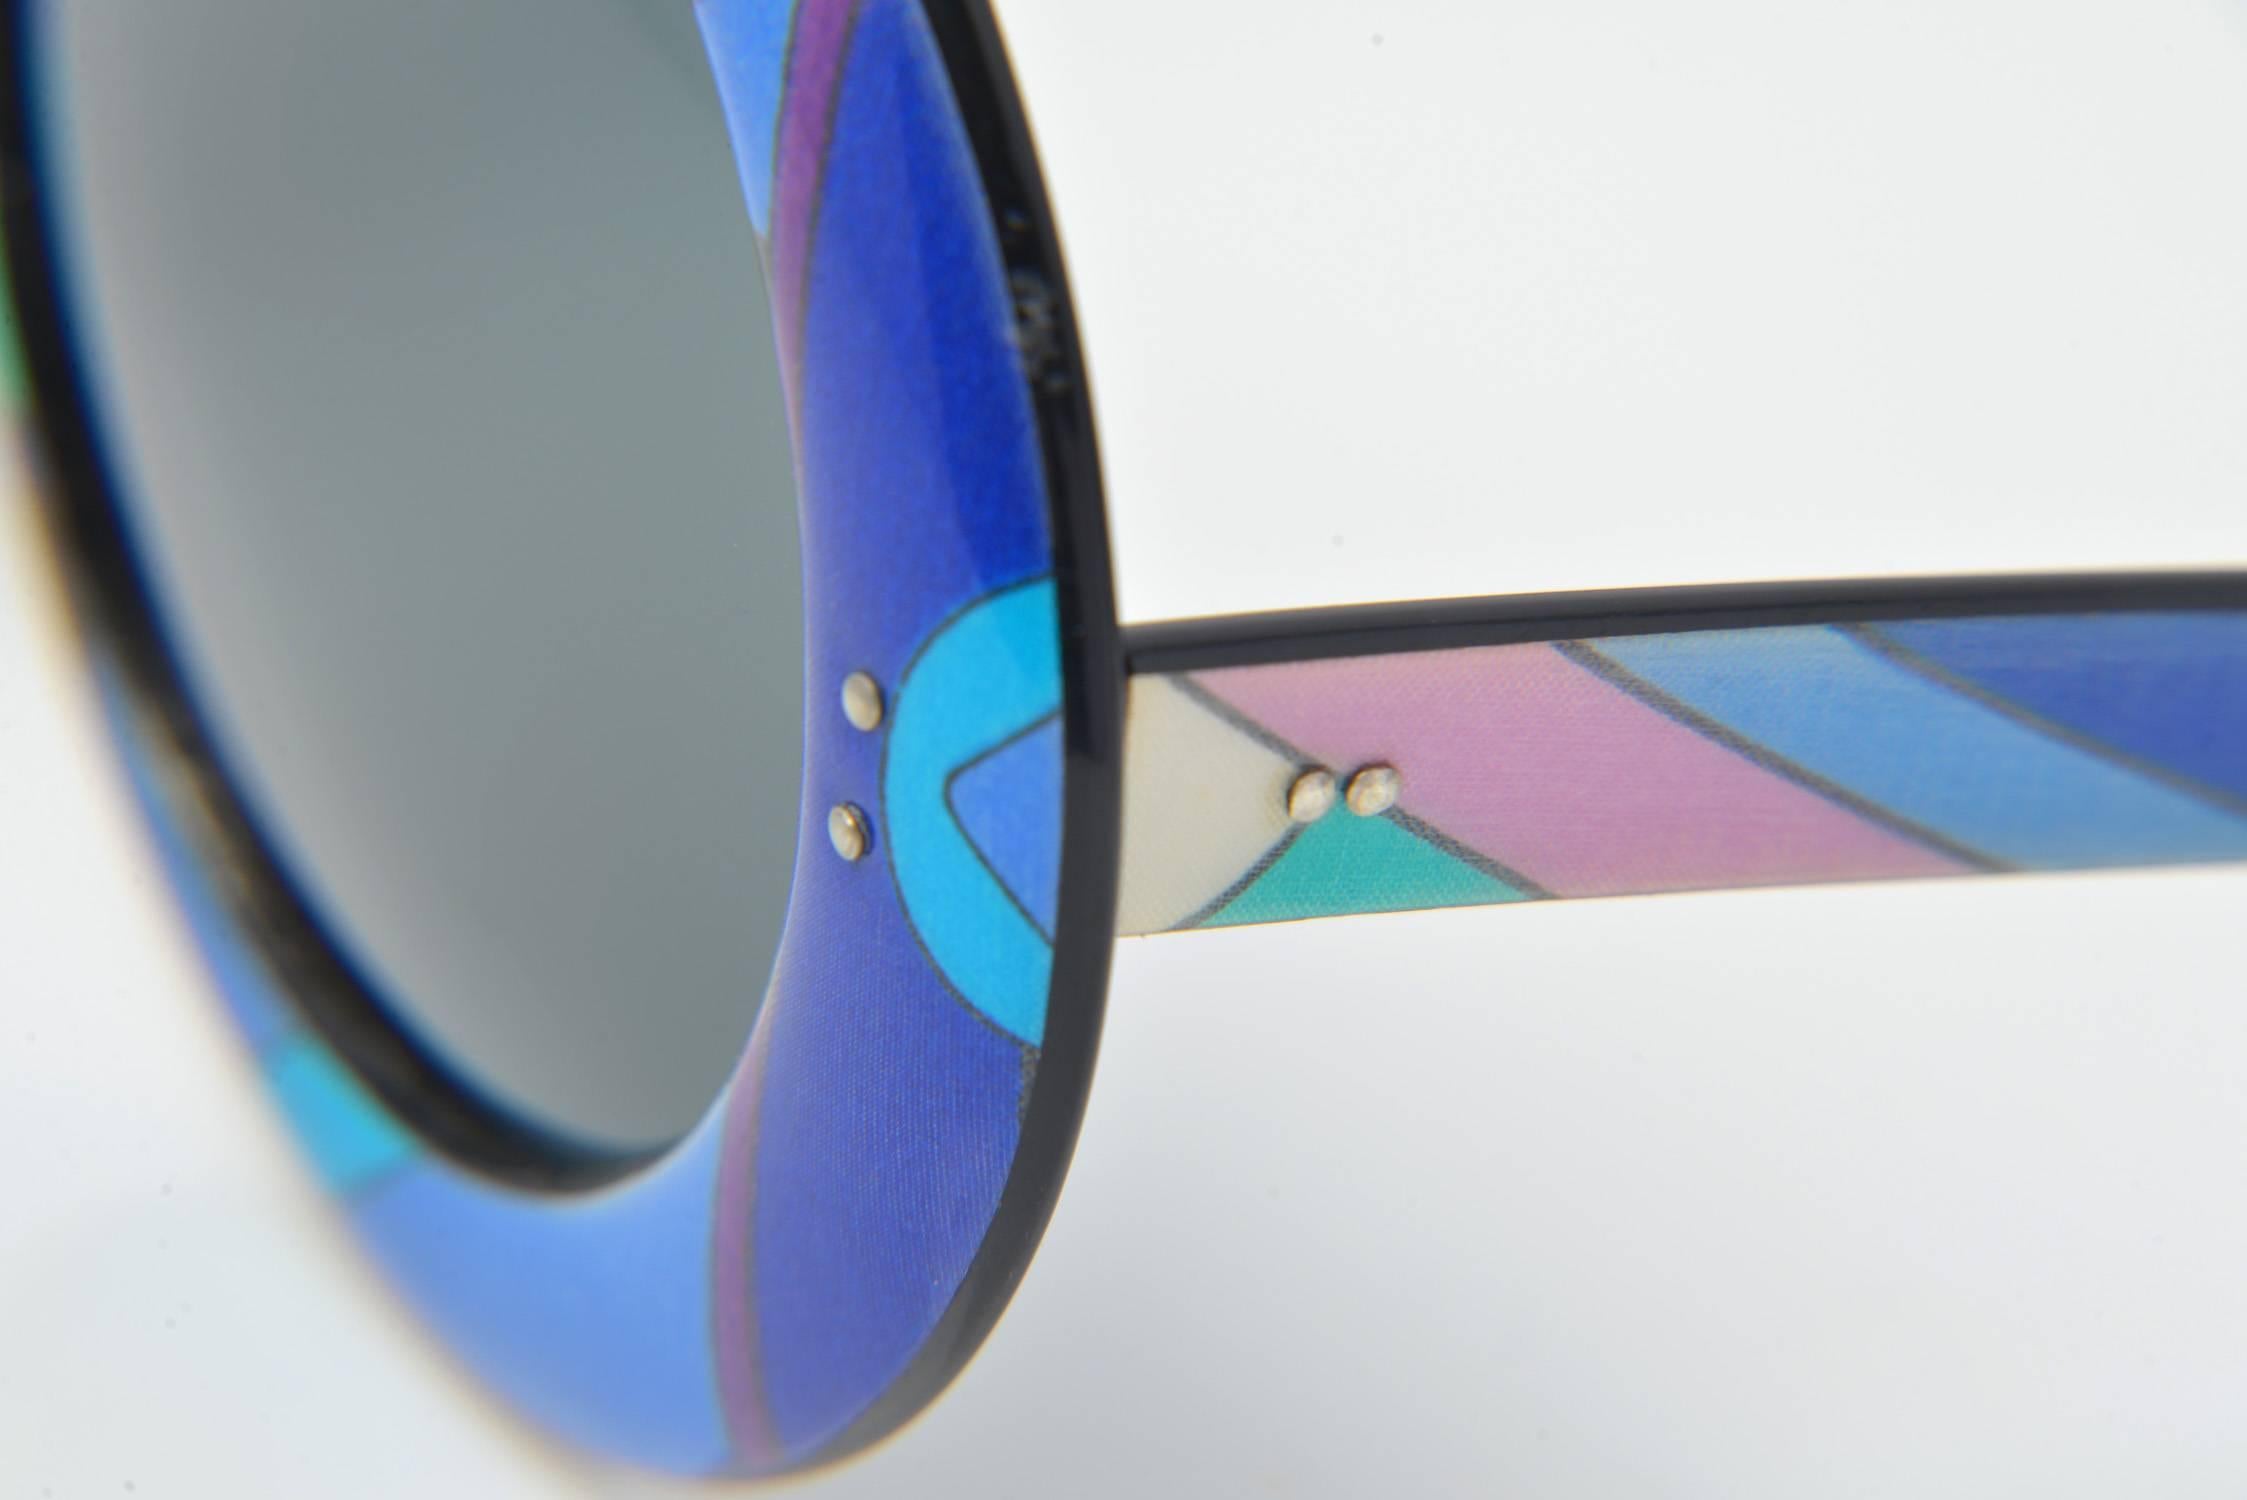 Highly collectible Mod 1960's Pucci sunglasses...enough said.

Okay, maybe a bit more...Great for any and every day wear, a resort getaway, or bring some fun into your grey, cold, winter day. 

Great for stage, screen, and print!!!

Two tiny silver